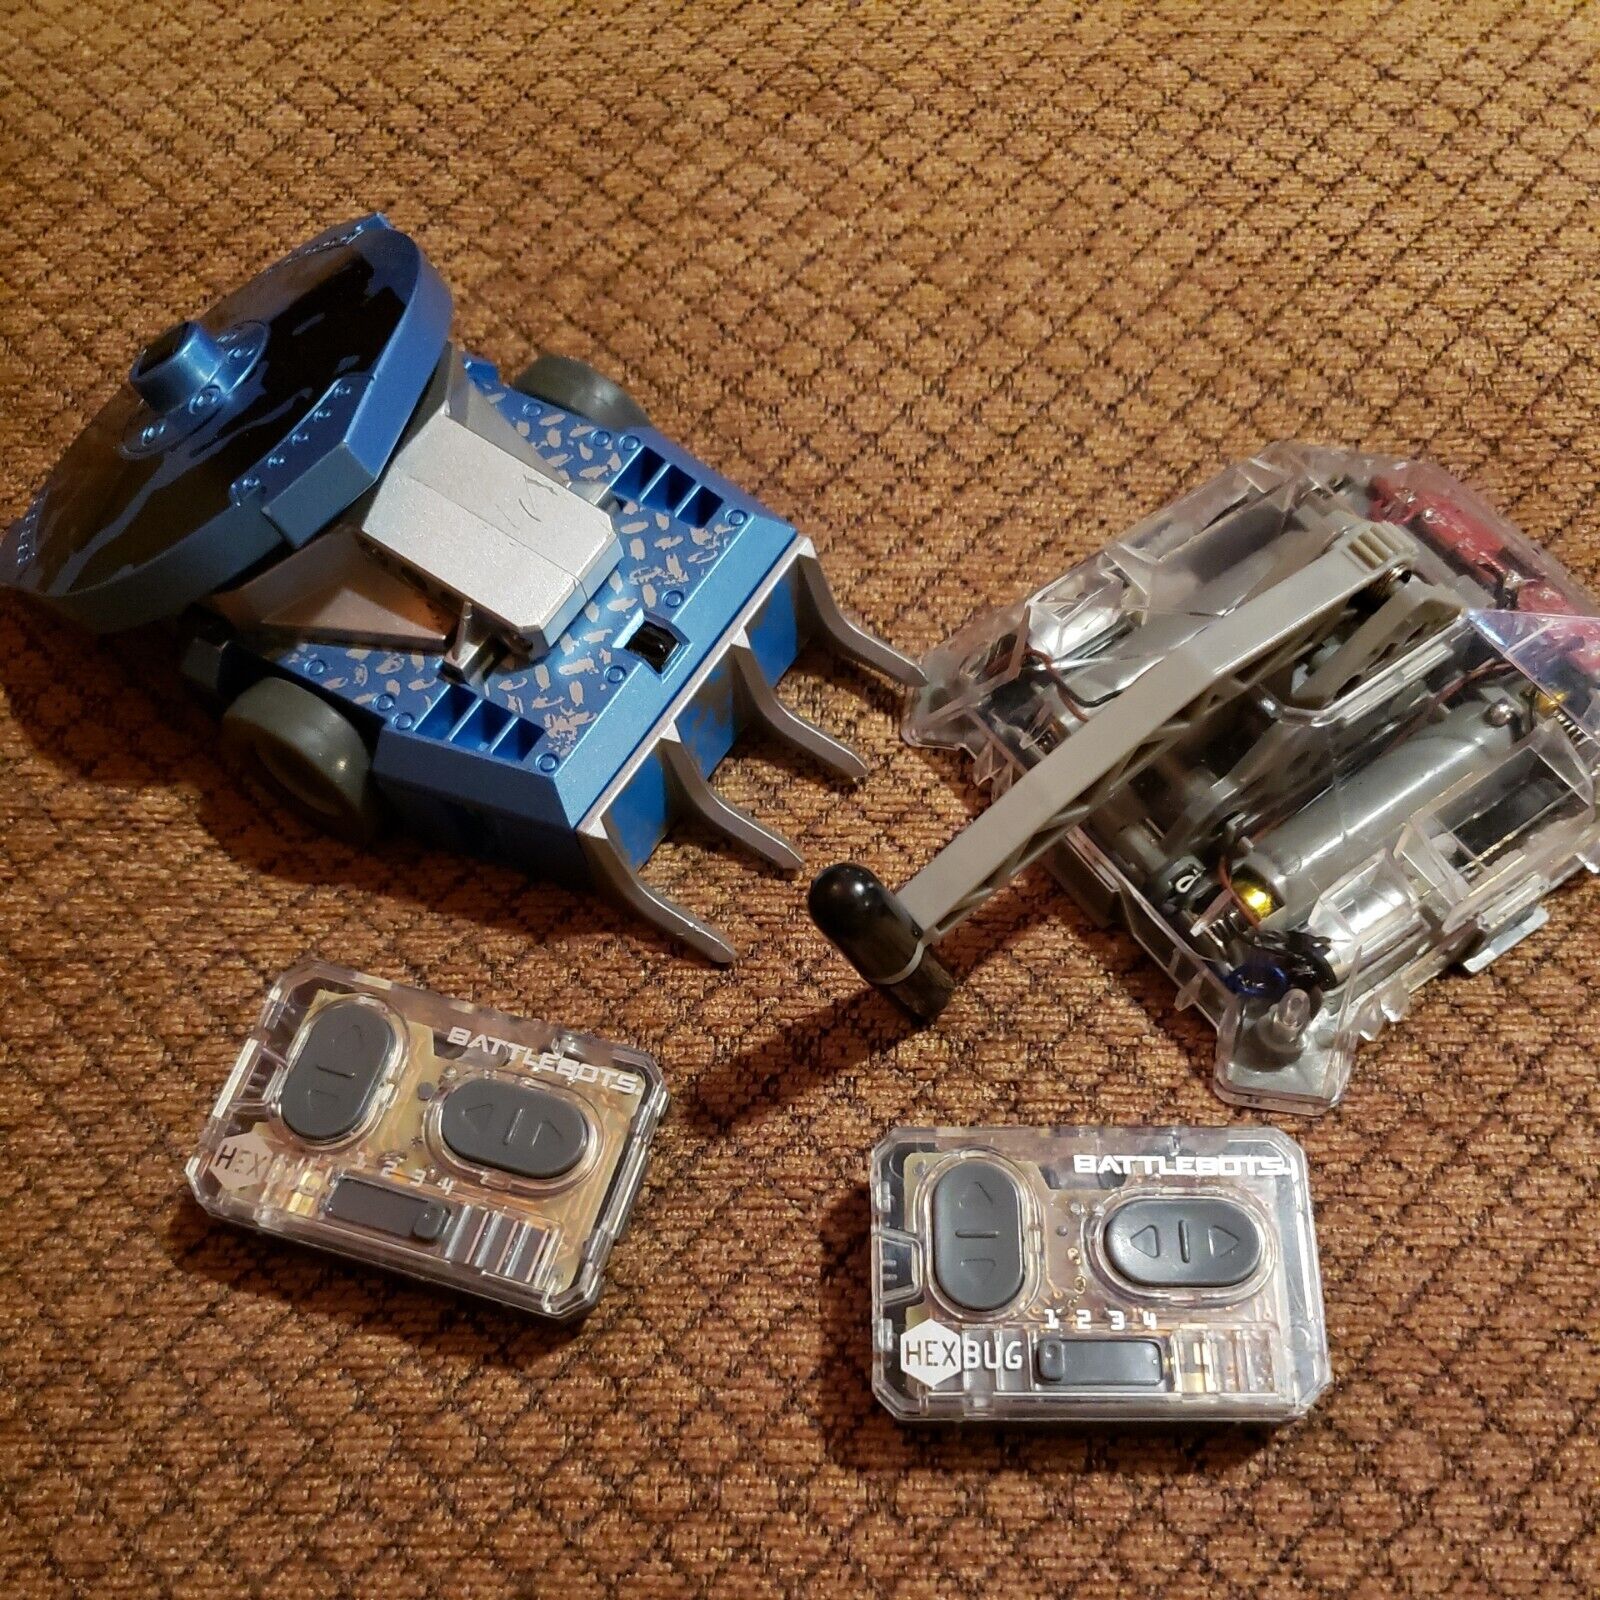 Battlebots Hexbug Lot Of 2 All In Pictures. Not Tested